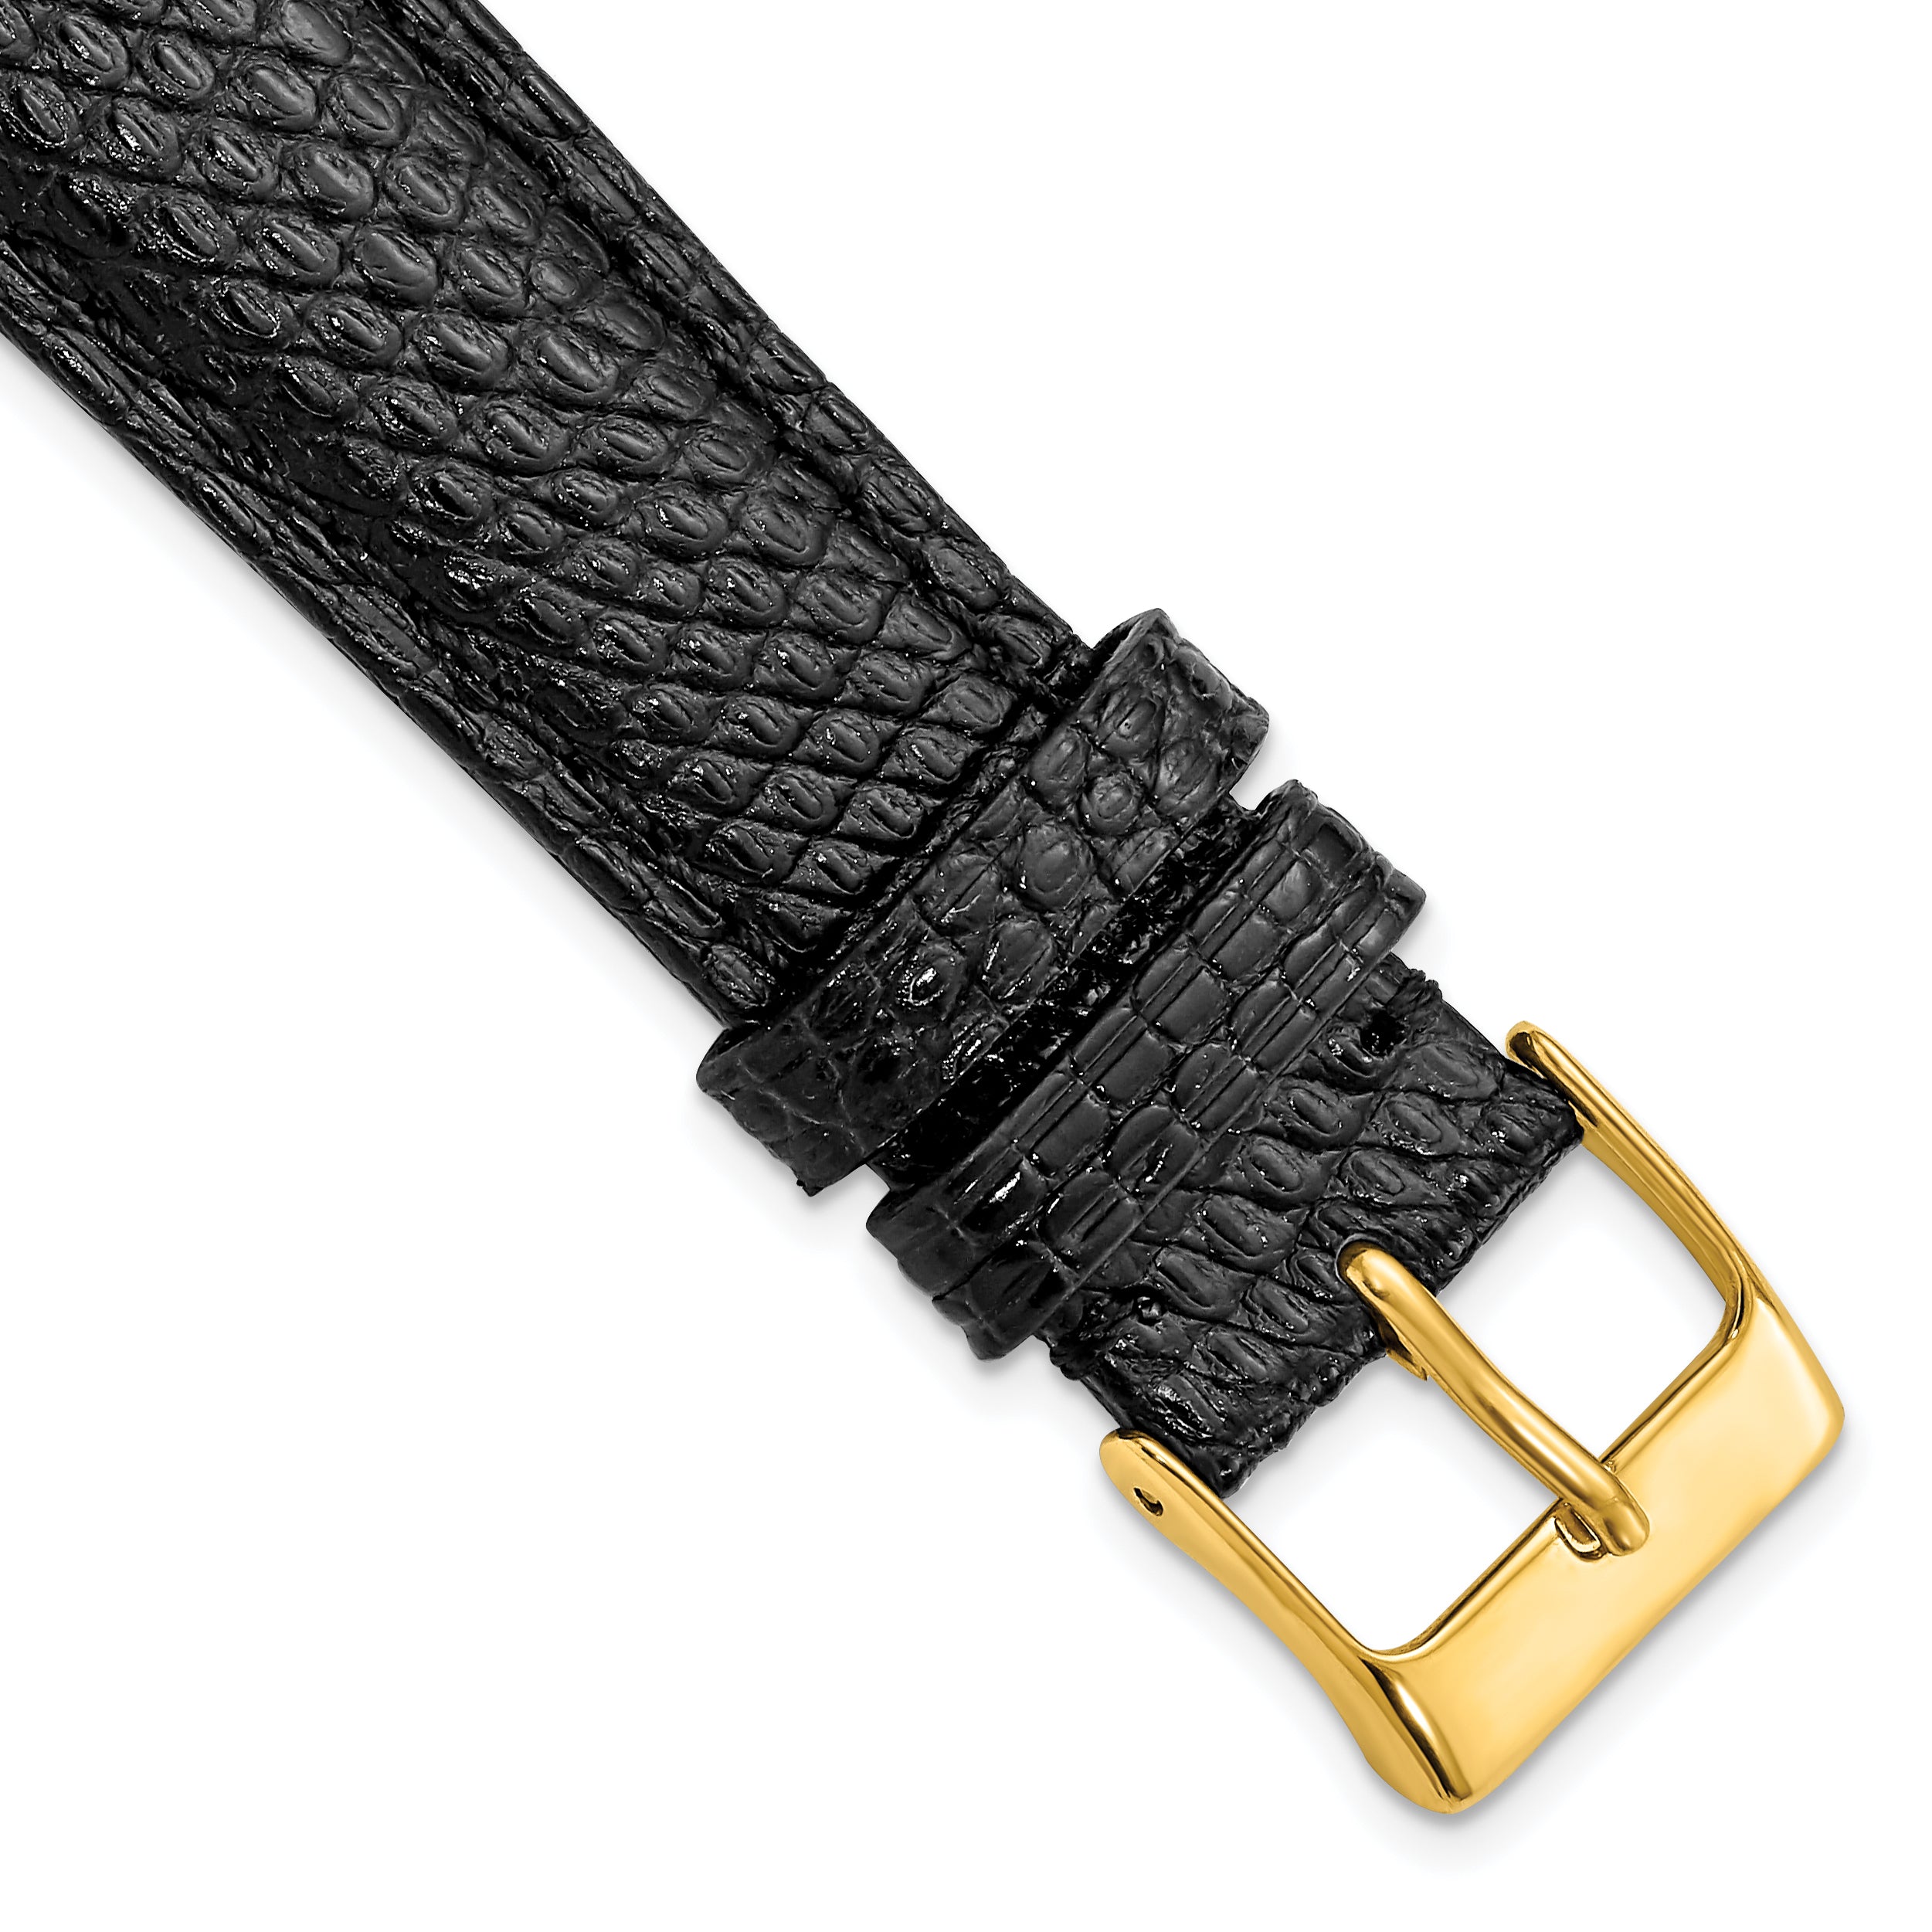 DeBeer 19mm Black Genuine Lizard Leather with Gold-tone Buckle 7.5 inch Watch Band